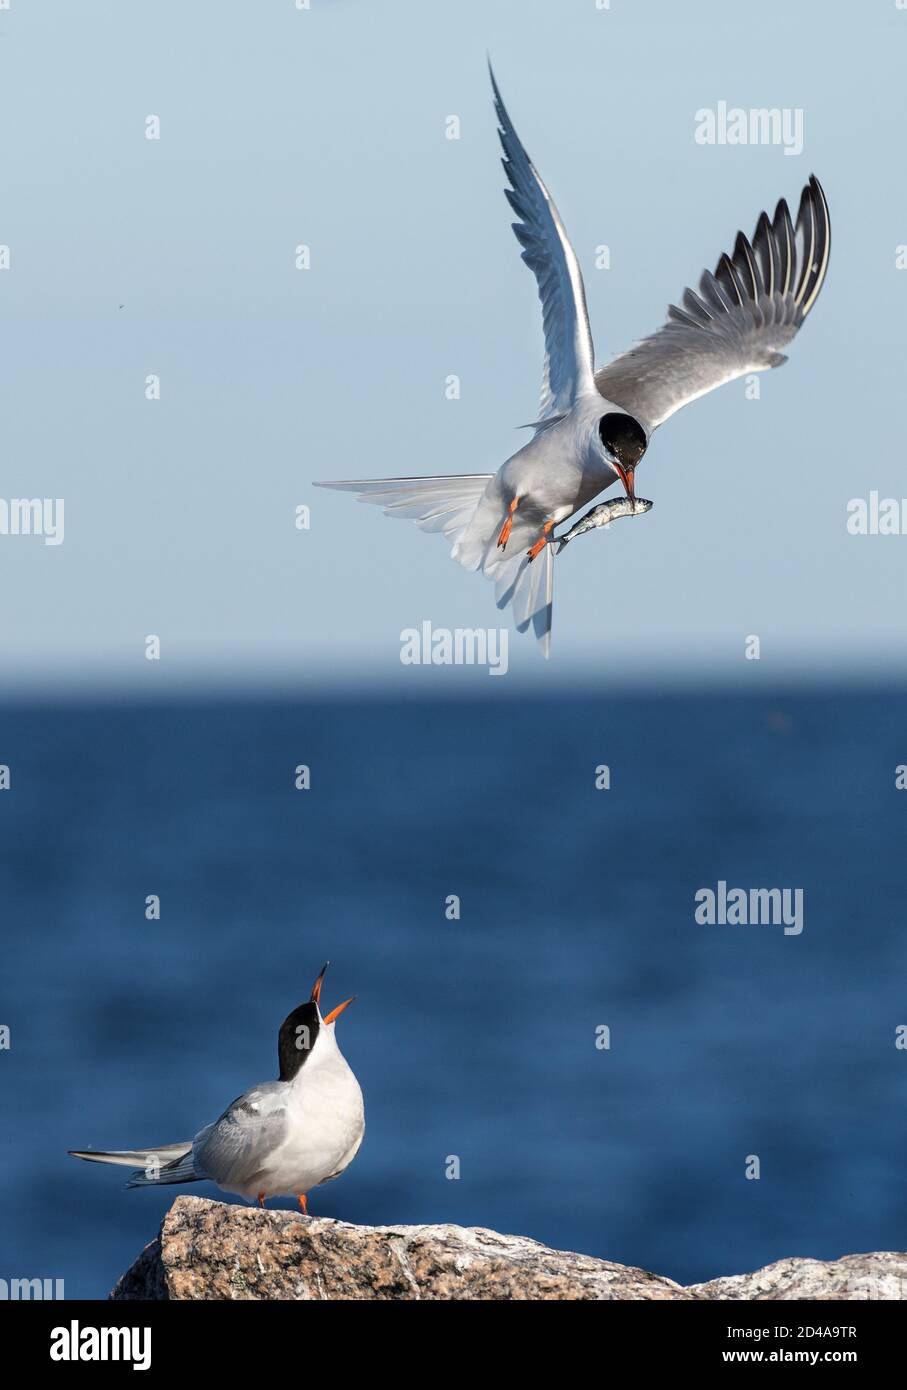 Ritual courtship of terns during the mating season. Common Terns interacting in flight. Adult common terns in flight on the sky and sea background. Sc Stock Photo